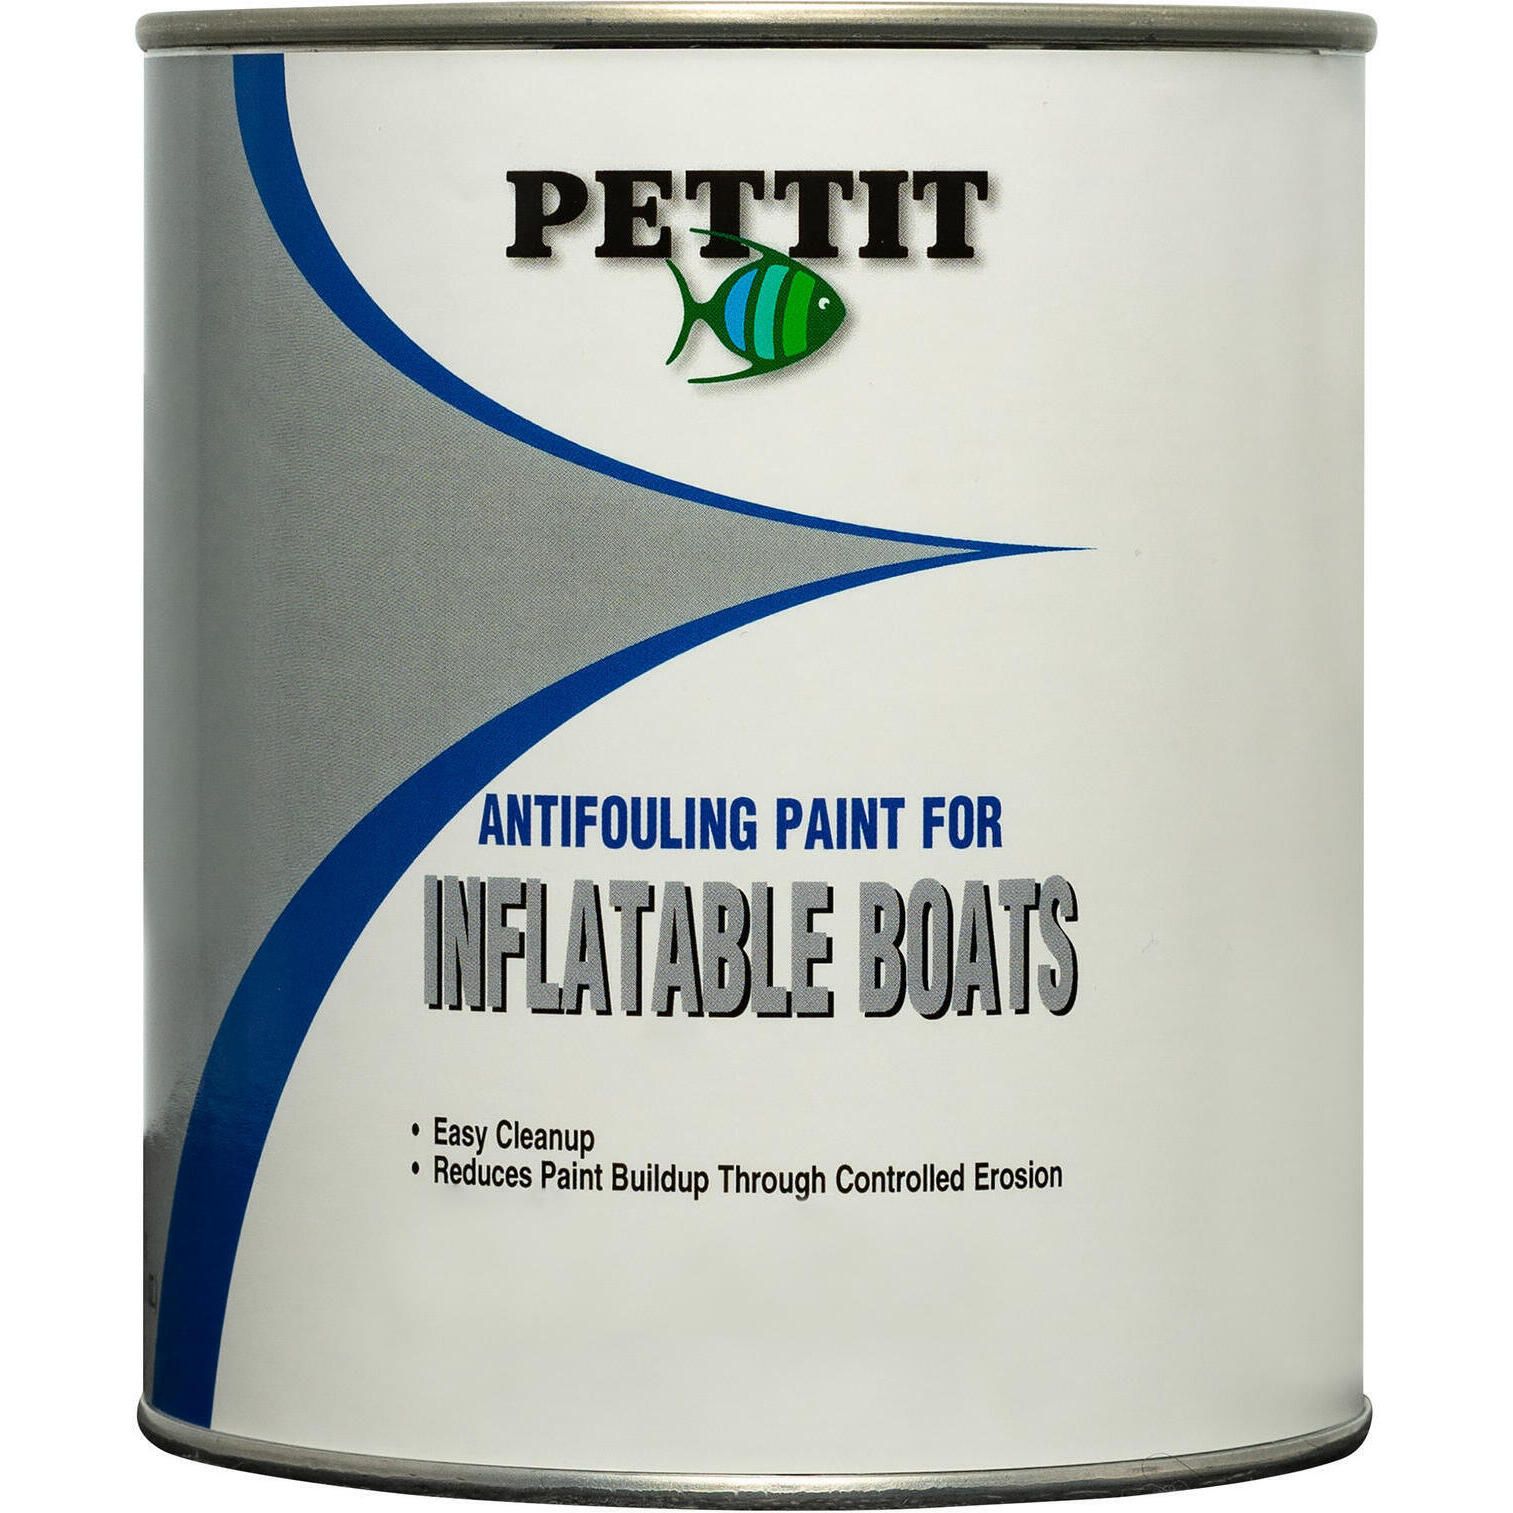 Buy TotalBoat Inflatable Boat Bottom Paint at Ubuy Indonesia